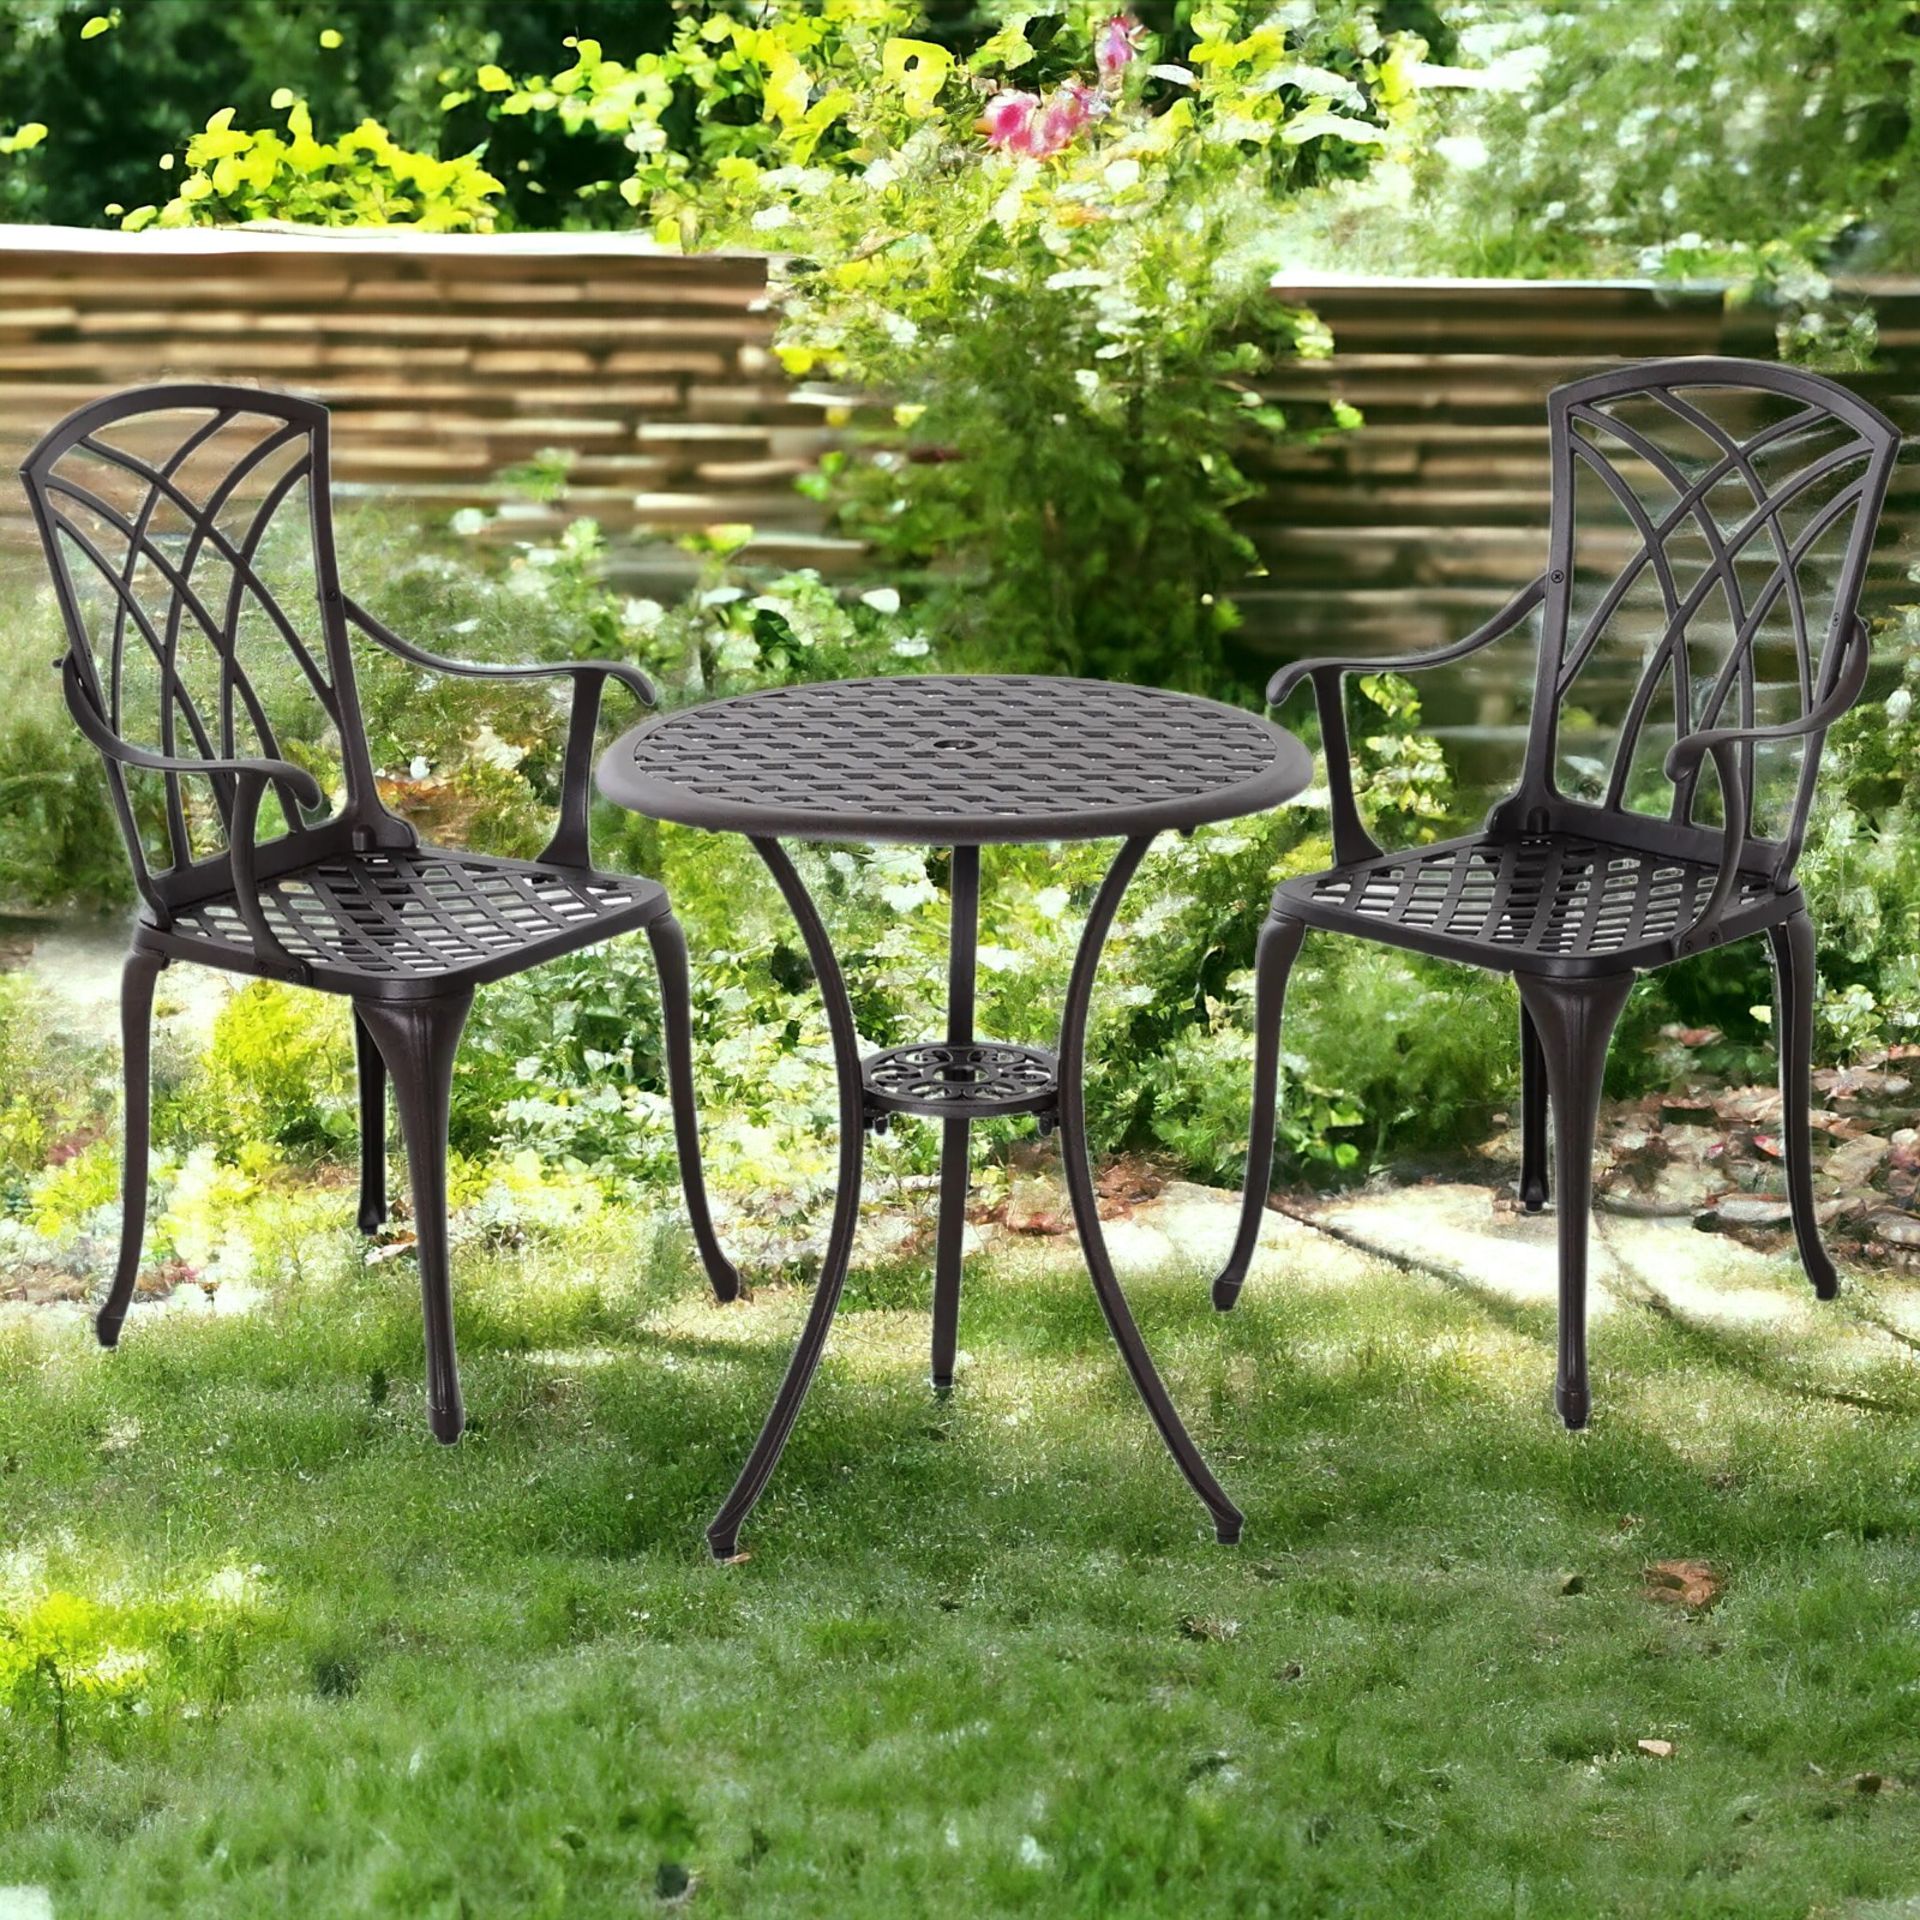 FREE DELIVERY -BRAND NEW 3 PCS COFFEE TABLE CHAIRS OUTDOOR GARDEN FURNITURE SET - Bild 2 aus 2